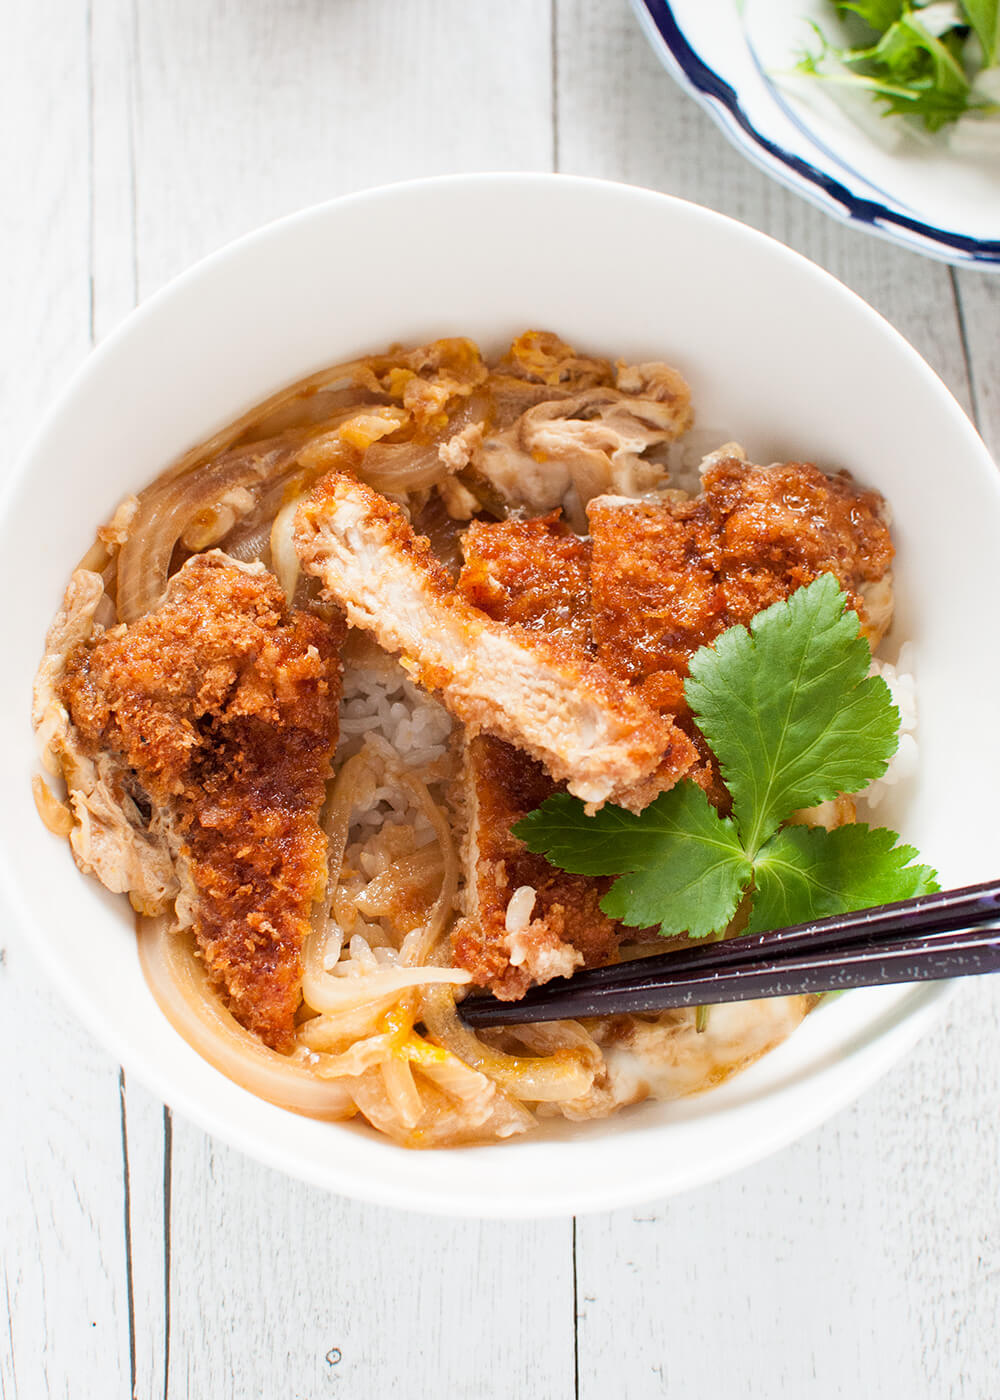 Katsu-don (カツ丼), is a very filling main dish. A bowl of rice topped with tonkatsu (deep fried crumbed pork cutlet), onion and beaten egg, cooked in dashi with sweet soy sauce.